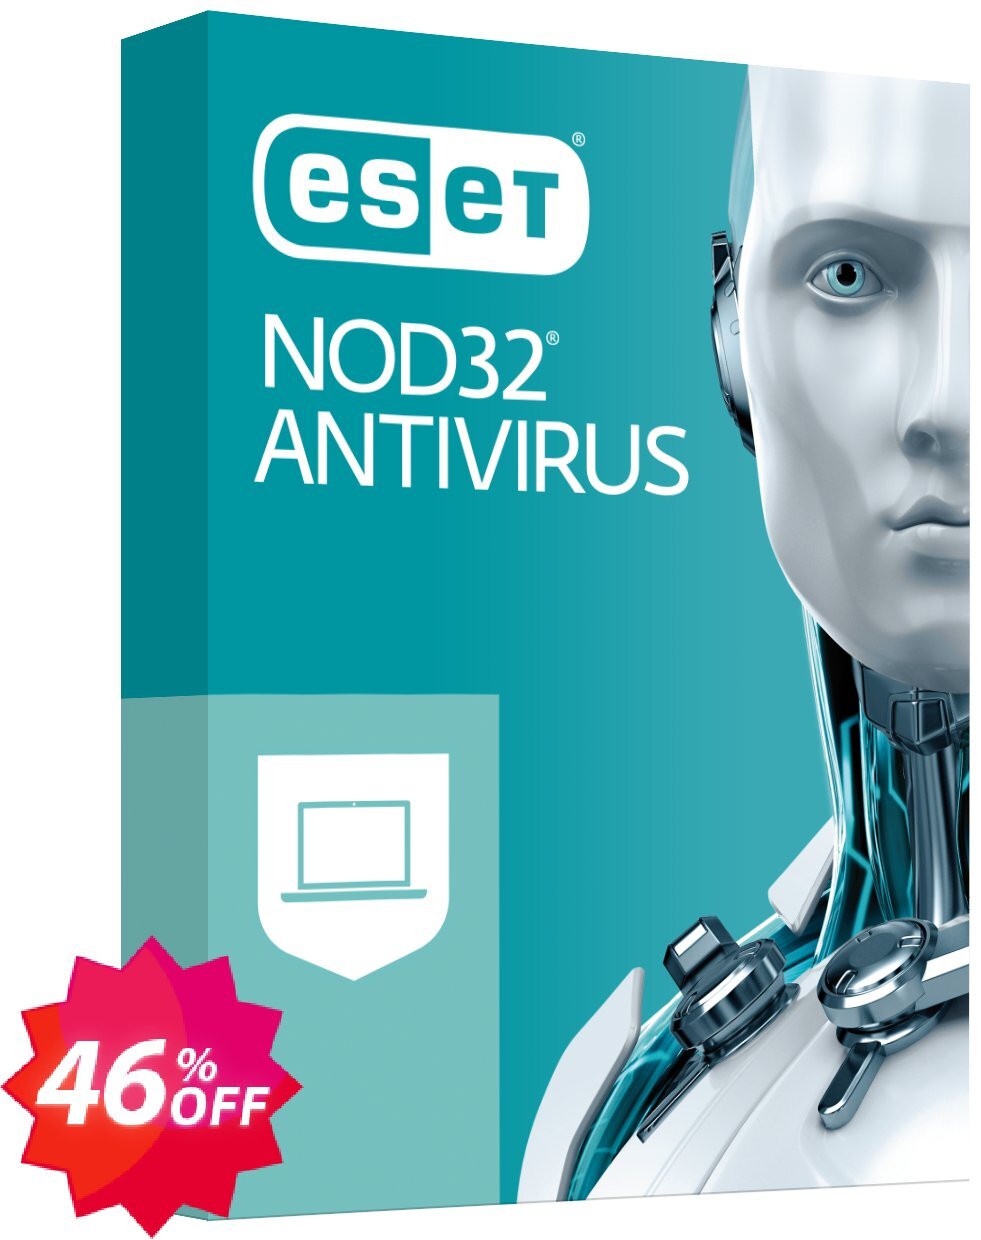 ESET NOD32 Antivirus -  3 Years 2 Devices Coupon code 46% discount 